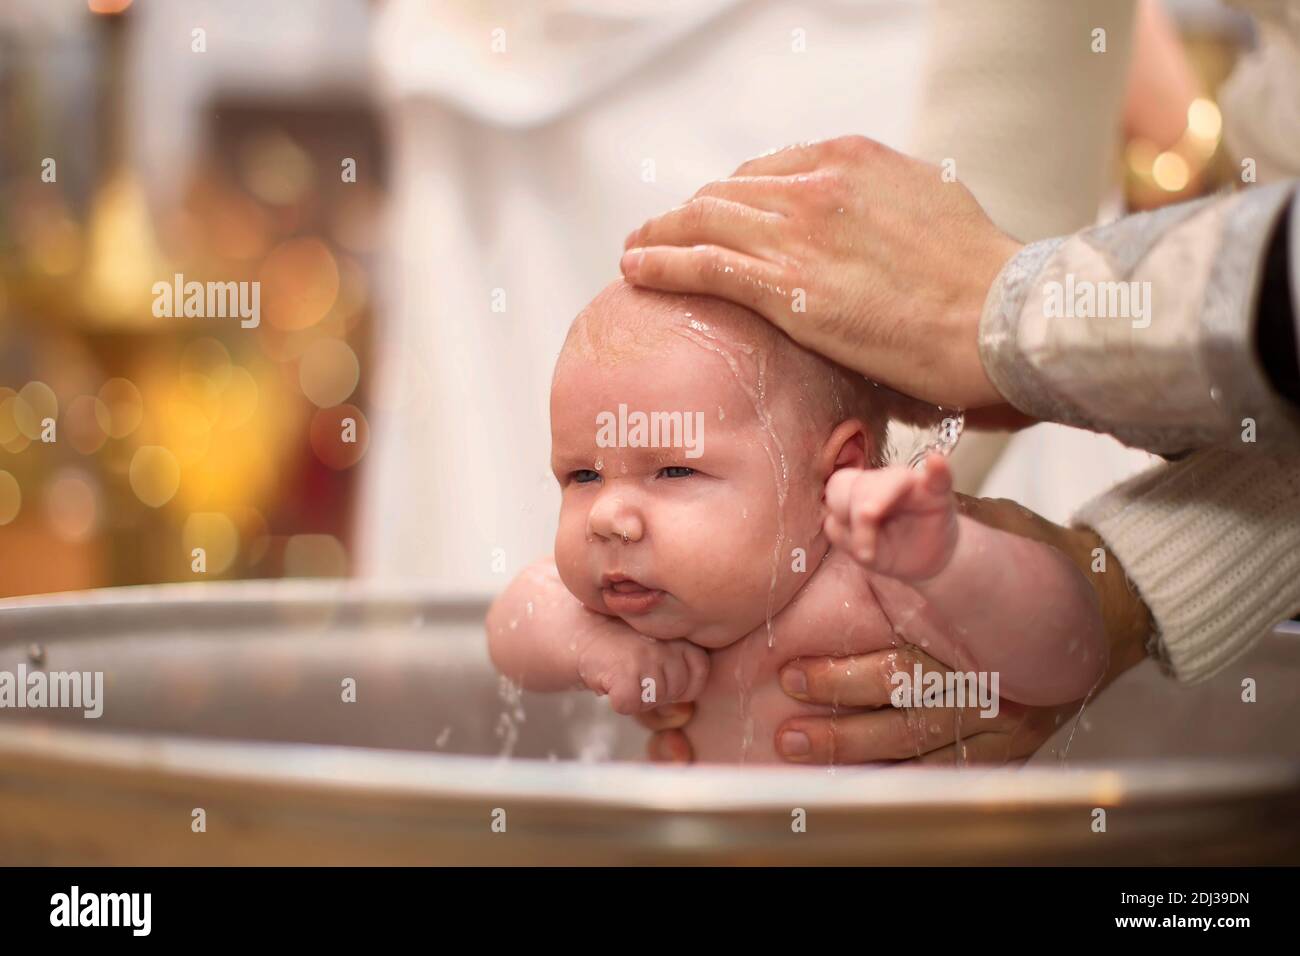 Orthodox baptism of a child.Baby in the baptismal font in the church. The hands of the priest pour water on the child during the ceremony of accepting Stock Photo